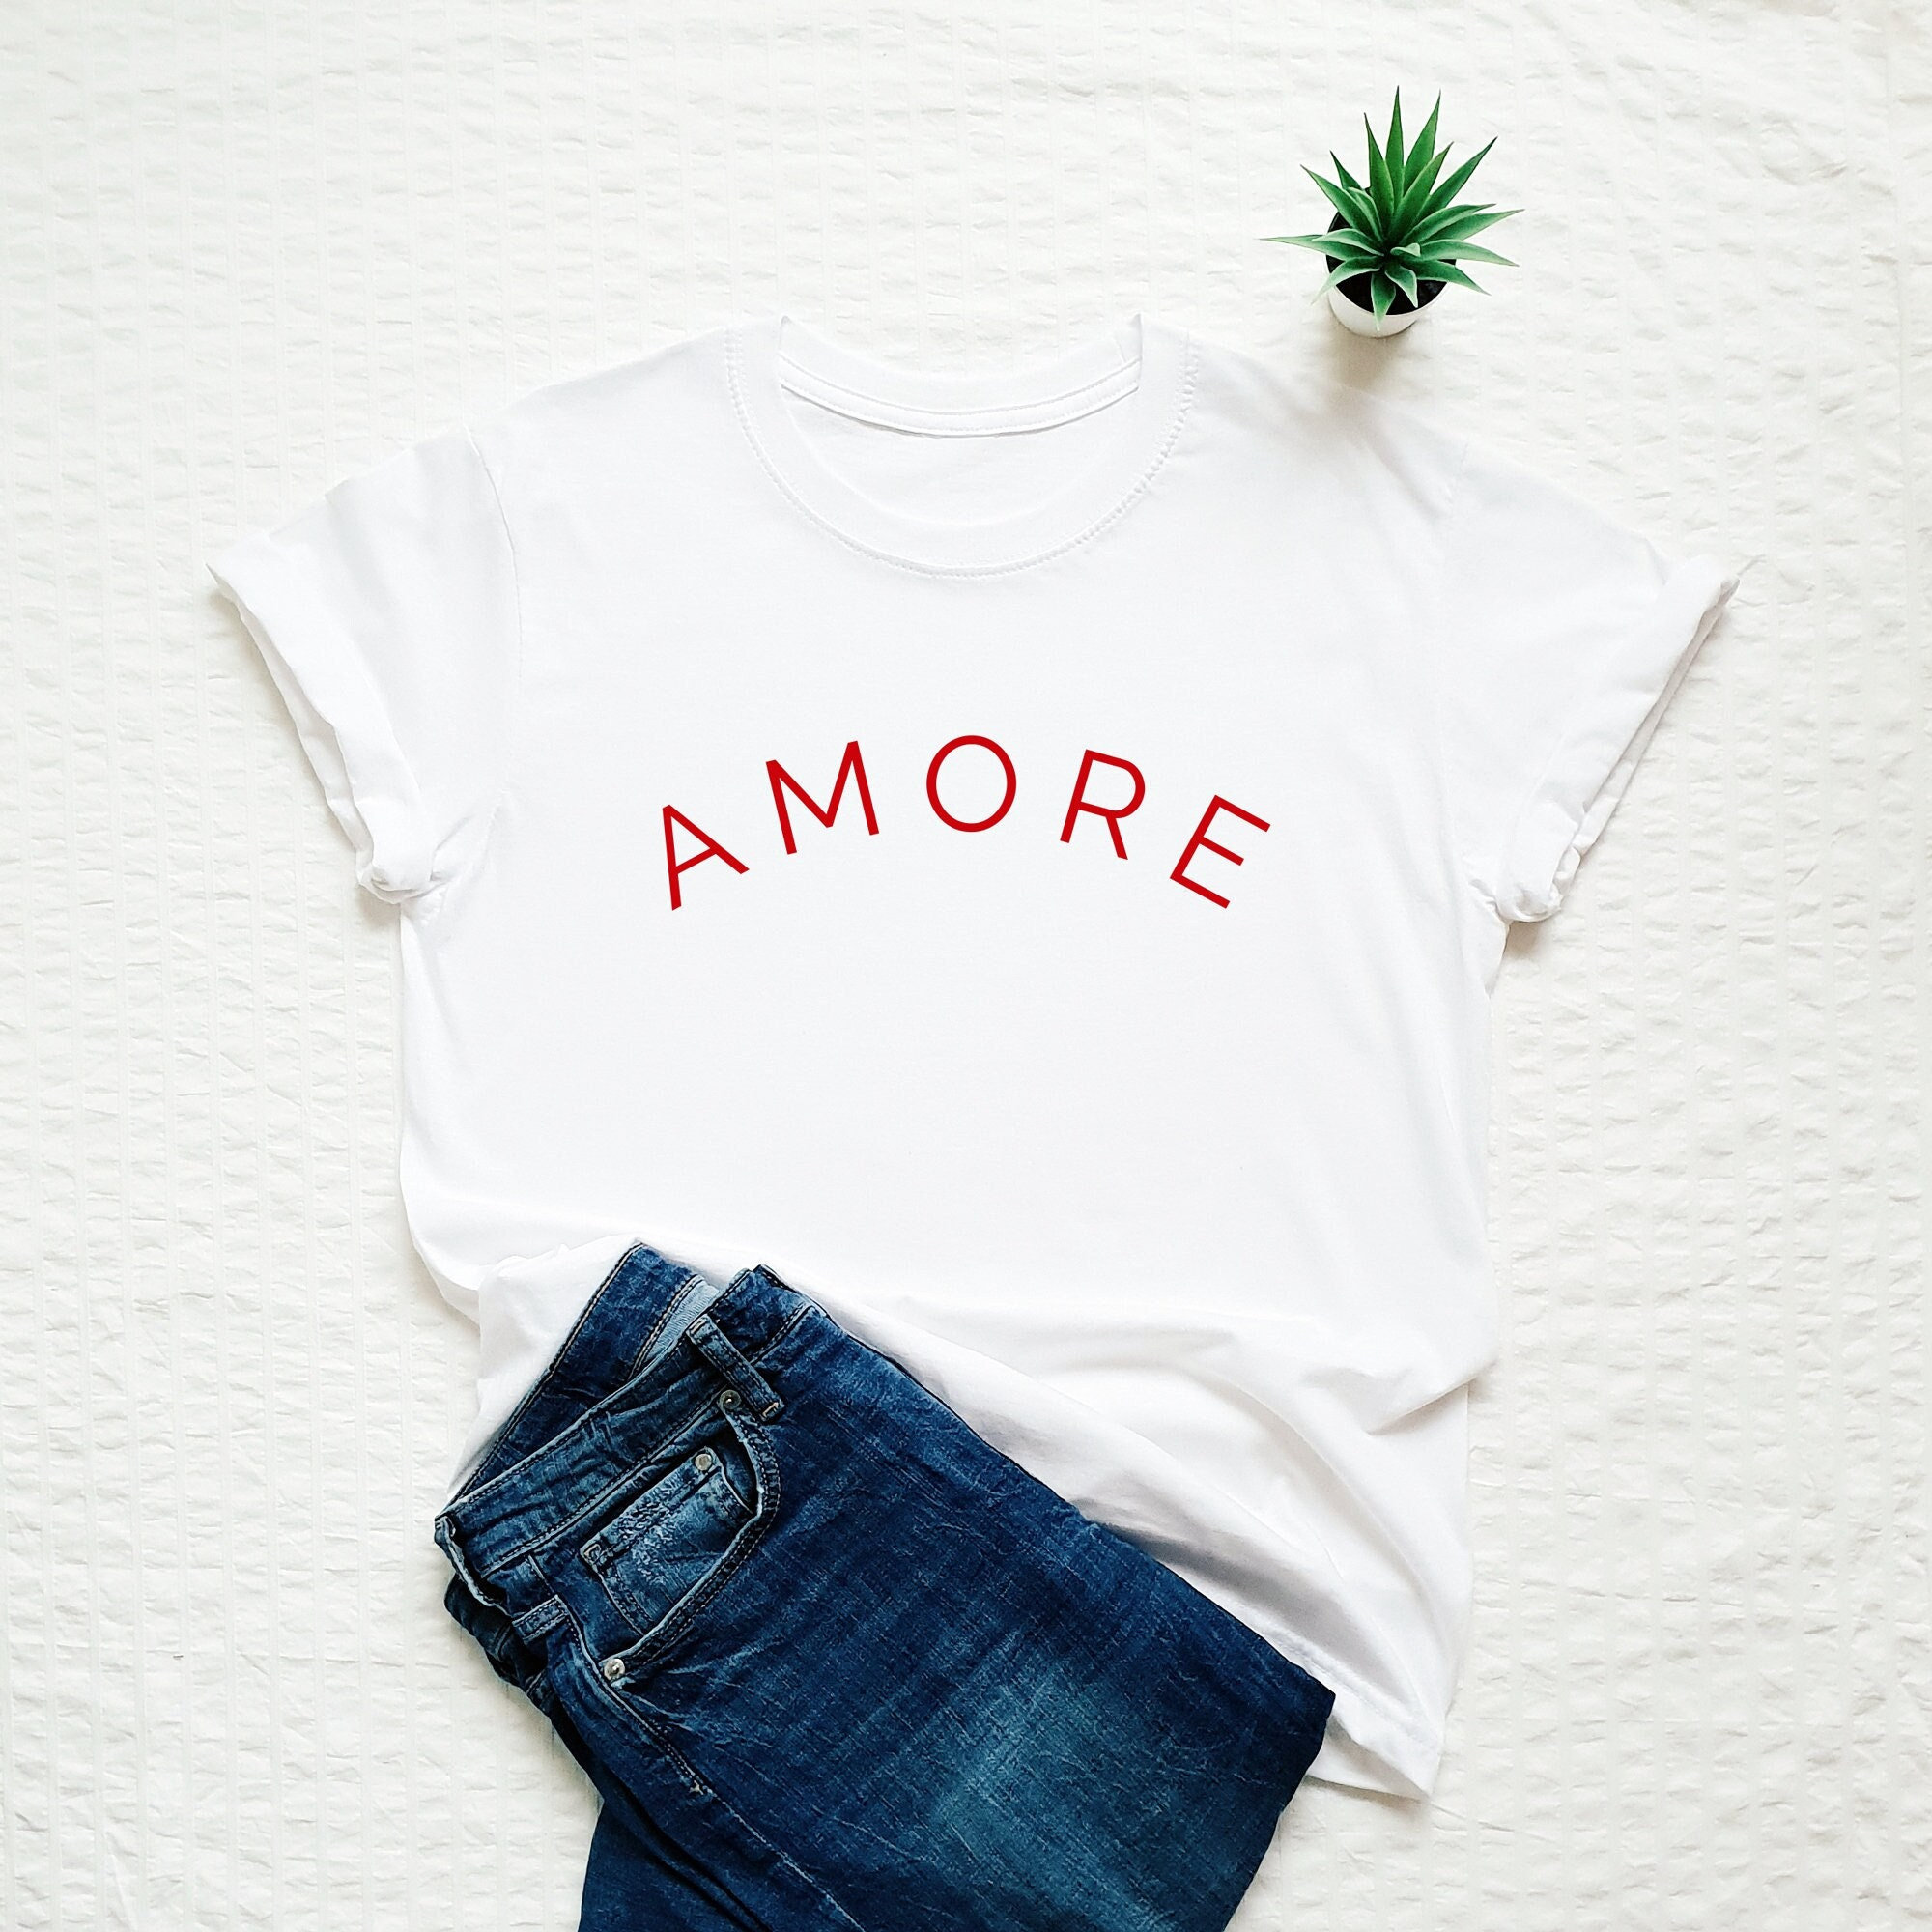 Personalized Casual Cotton t-Shirt With Beads Monogramming – Amore